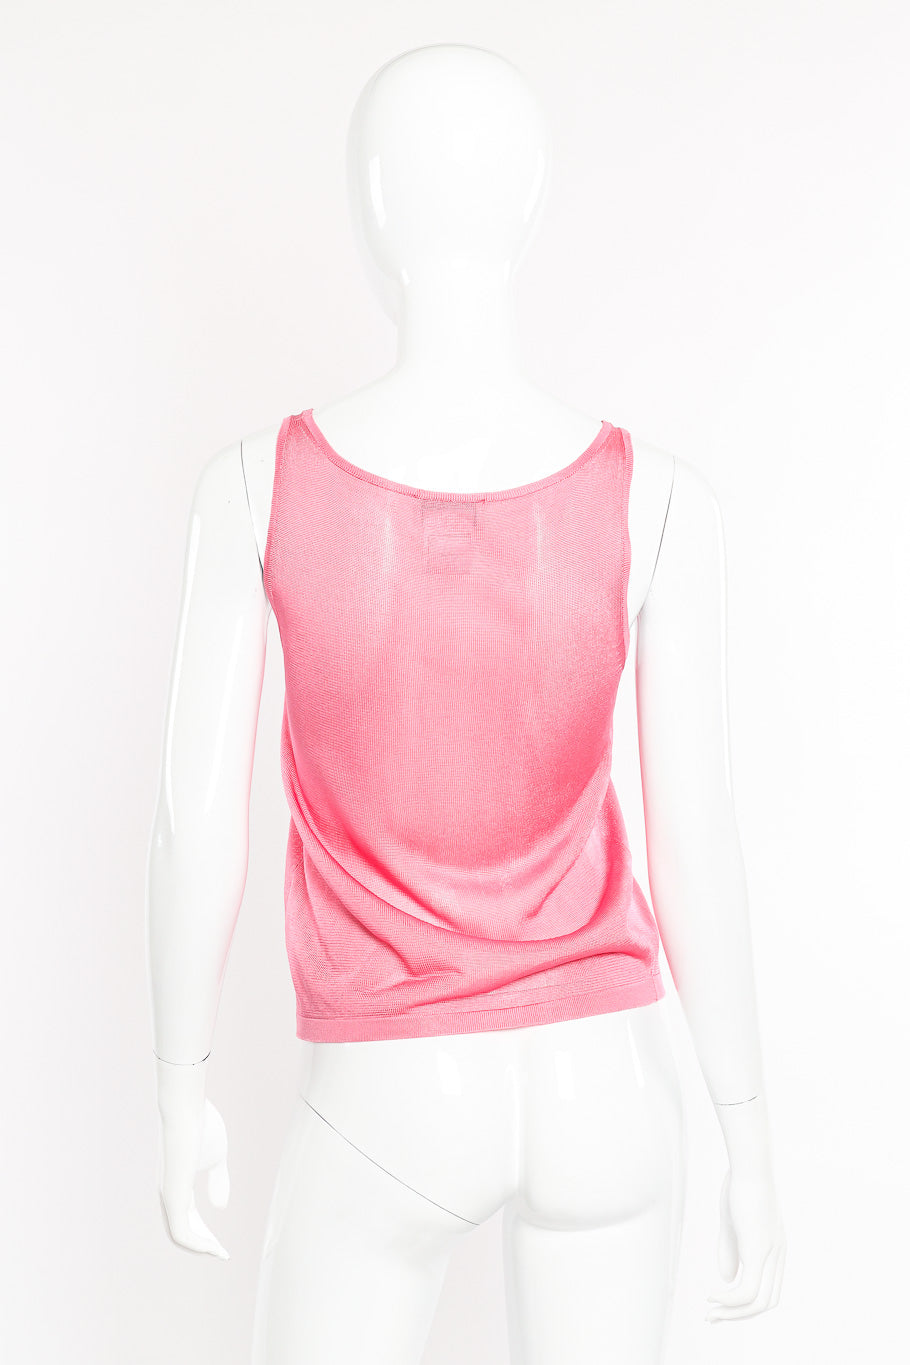 Cardigan and tank top set by Chanel on mannequin tank only back @recessla